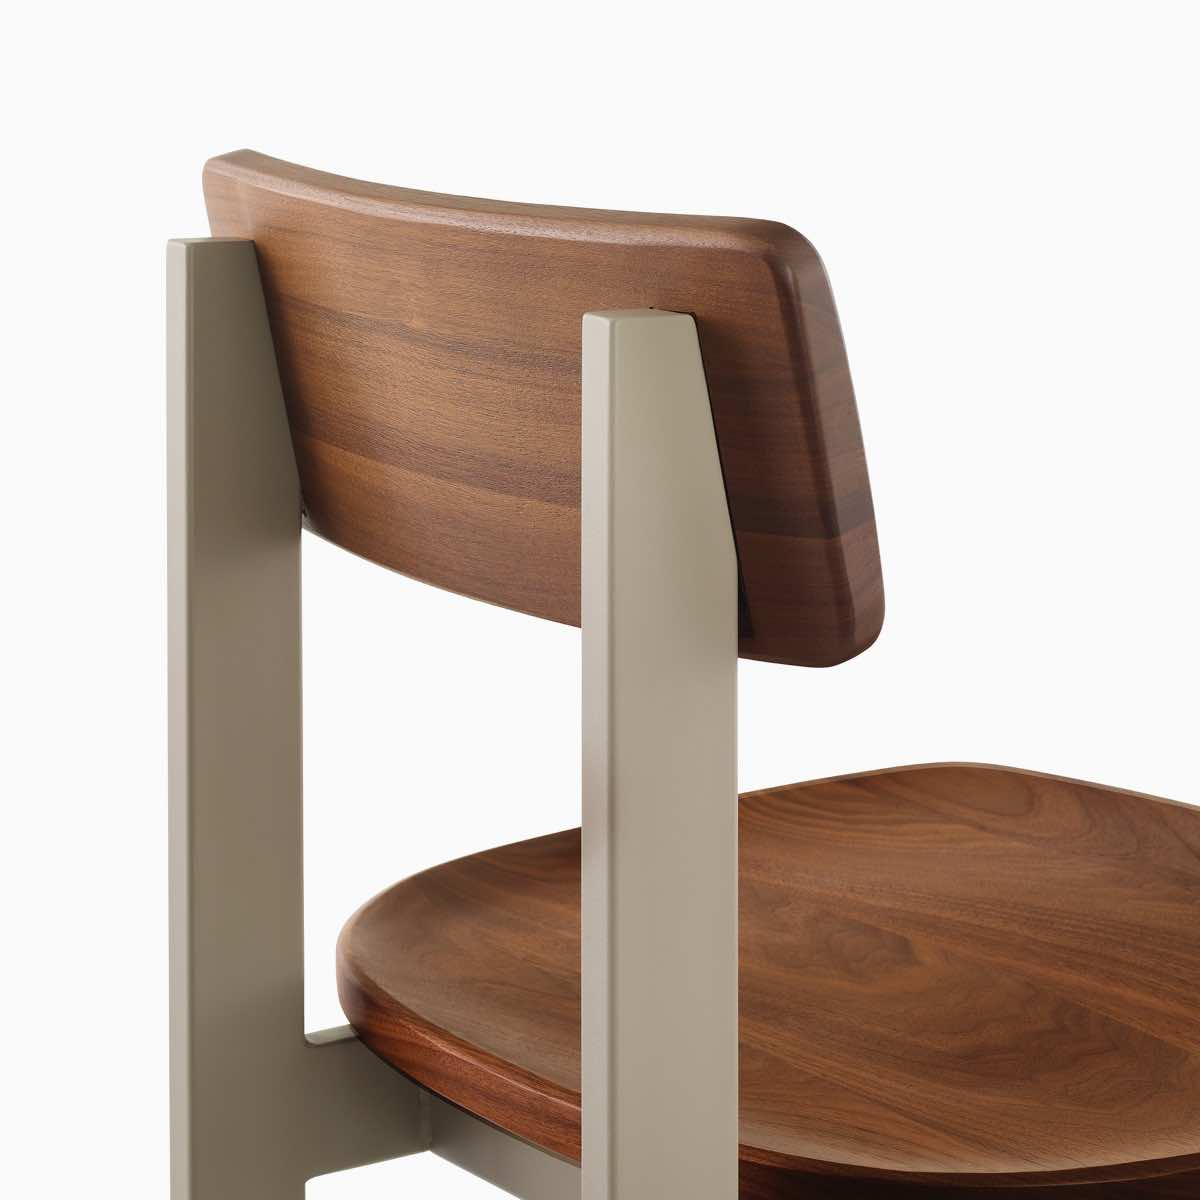 A close-up of a Betwixt Chair with walnut seat and backrest with a grey frame.